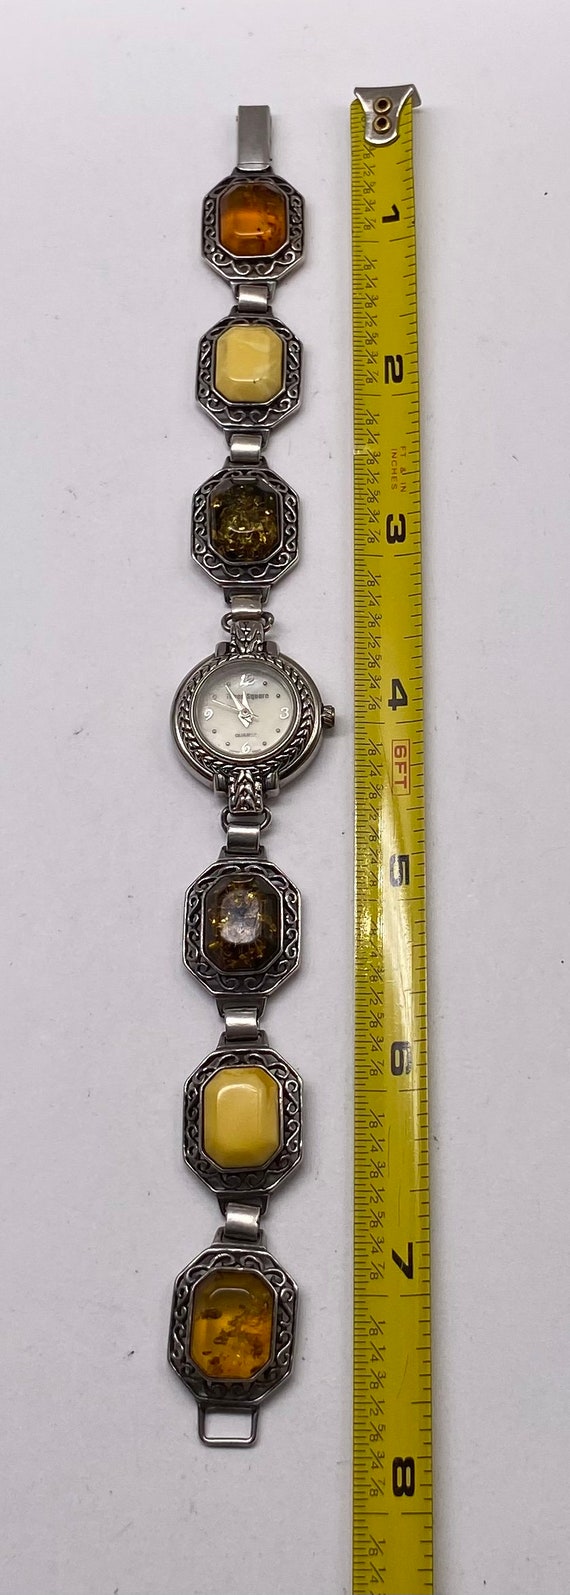 Vintage Sterling Silver Watch with Genuine Amber … - image 5